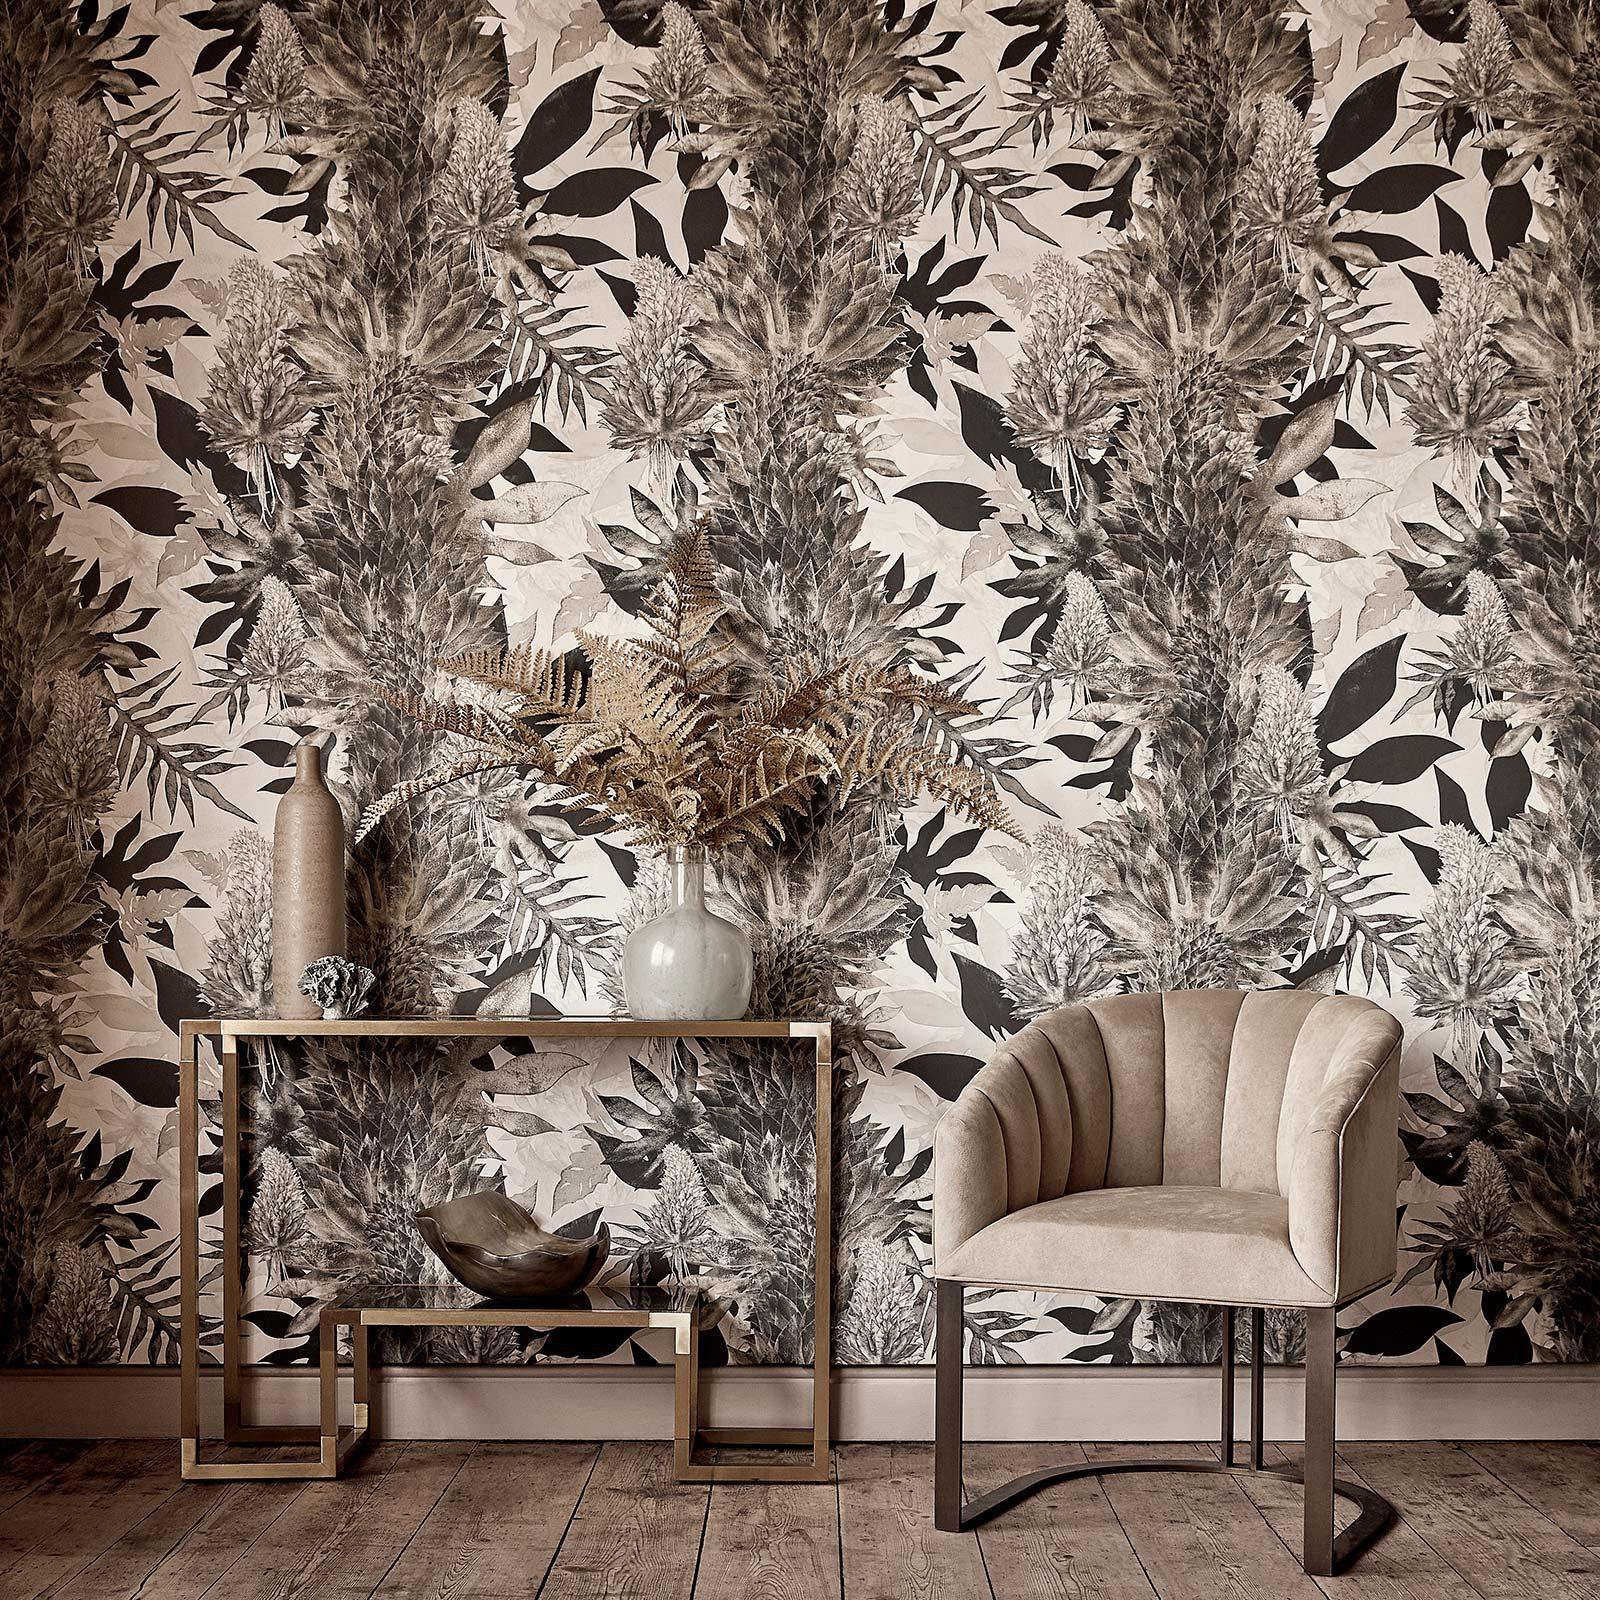 Reminiscent of a bygone era, Kimolia is a breath-taking collection of botanical wallcoverings. Set across a dramatic 140cm horizontal repeat, this majestic paradise blends faded vintage hues and decadent fibrous textures, with a fresh contemporary